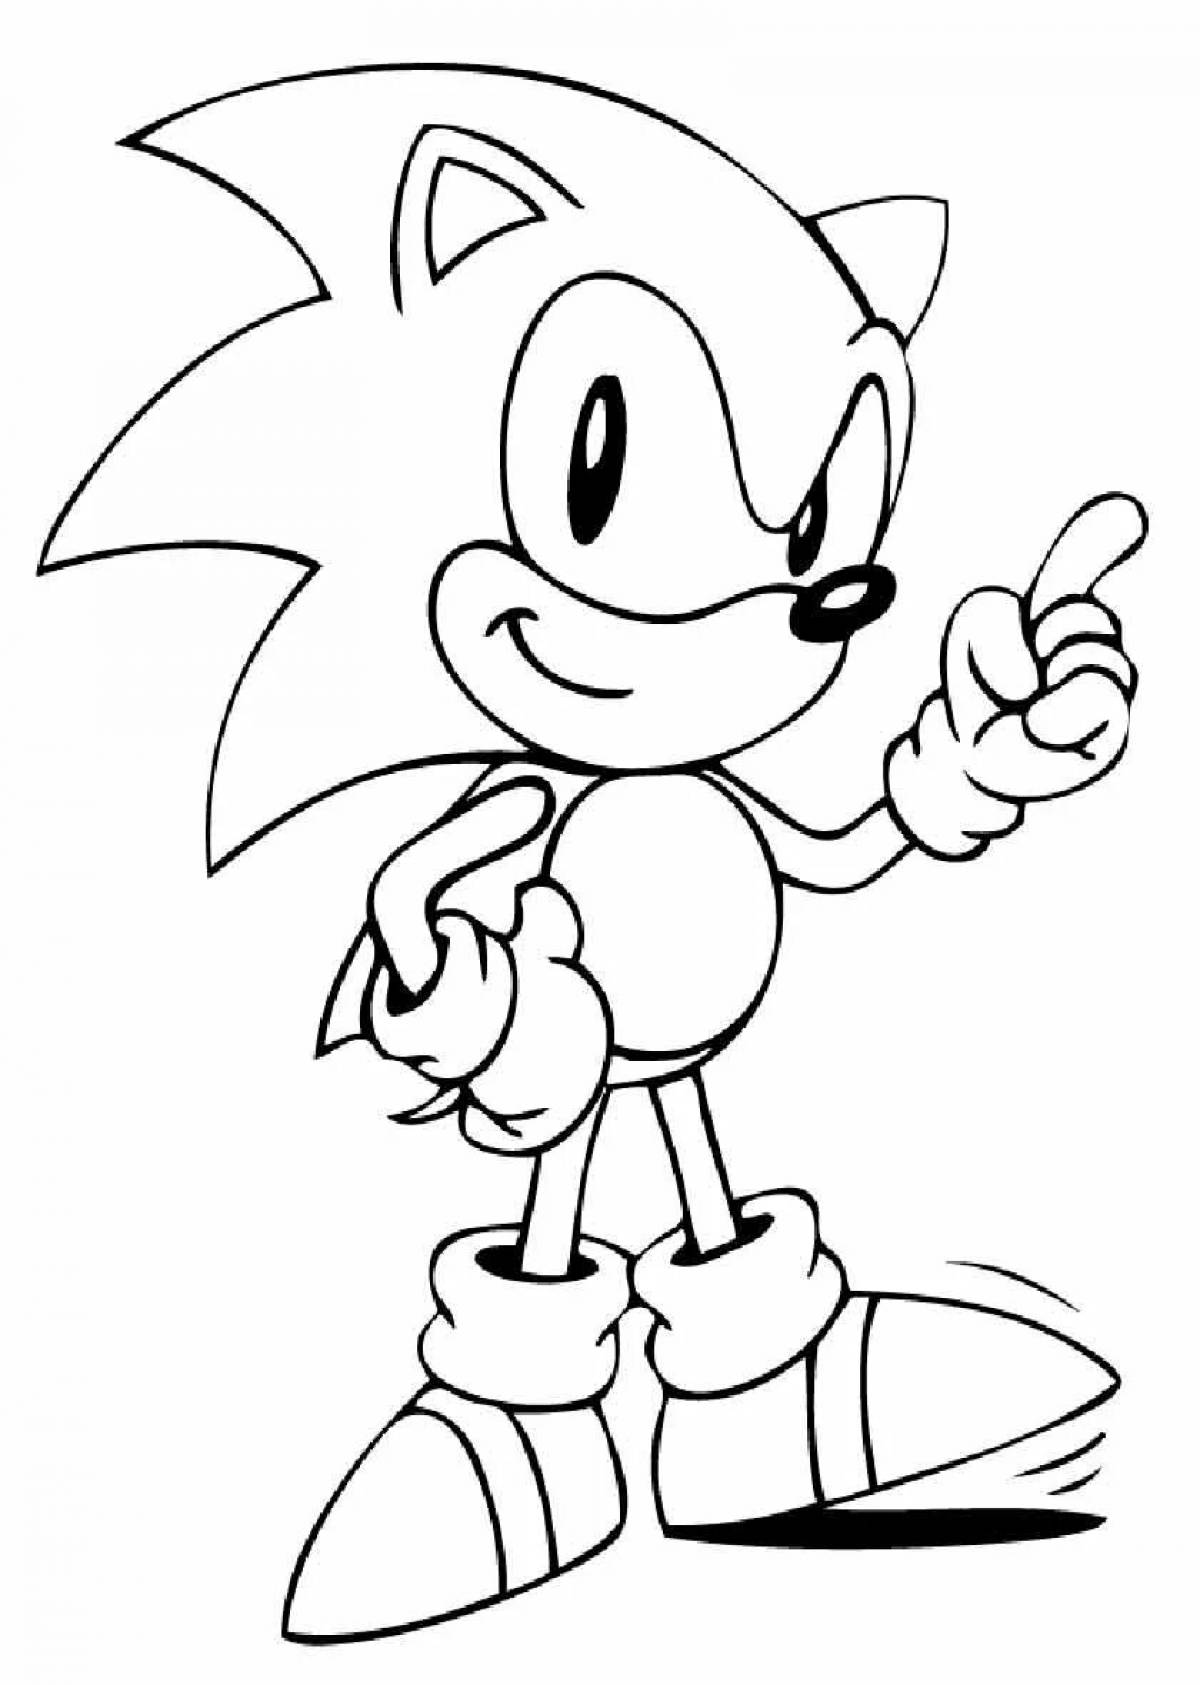 Dreamy coloring sonic the hedgehog